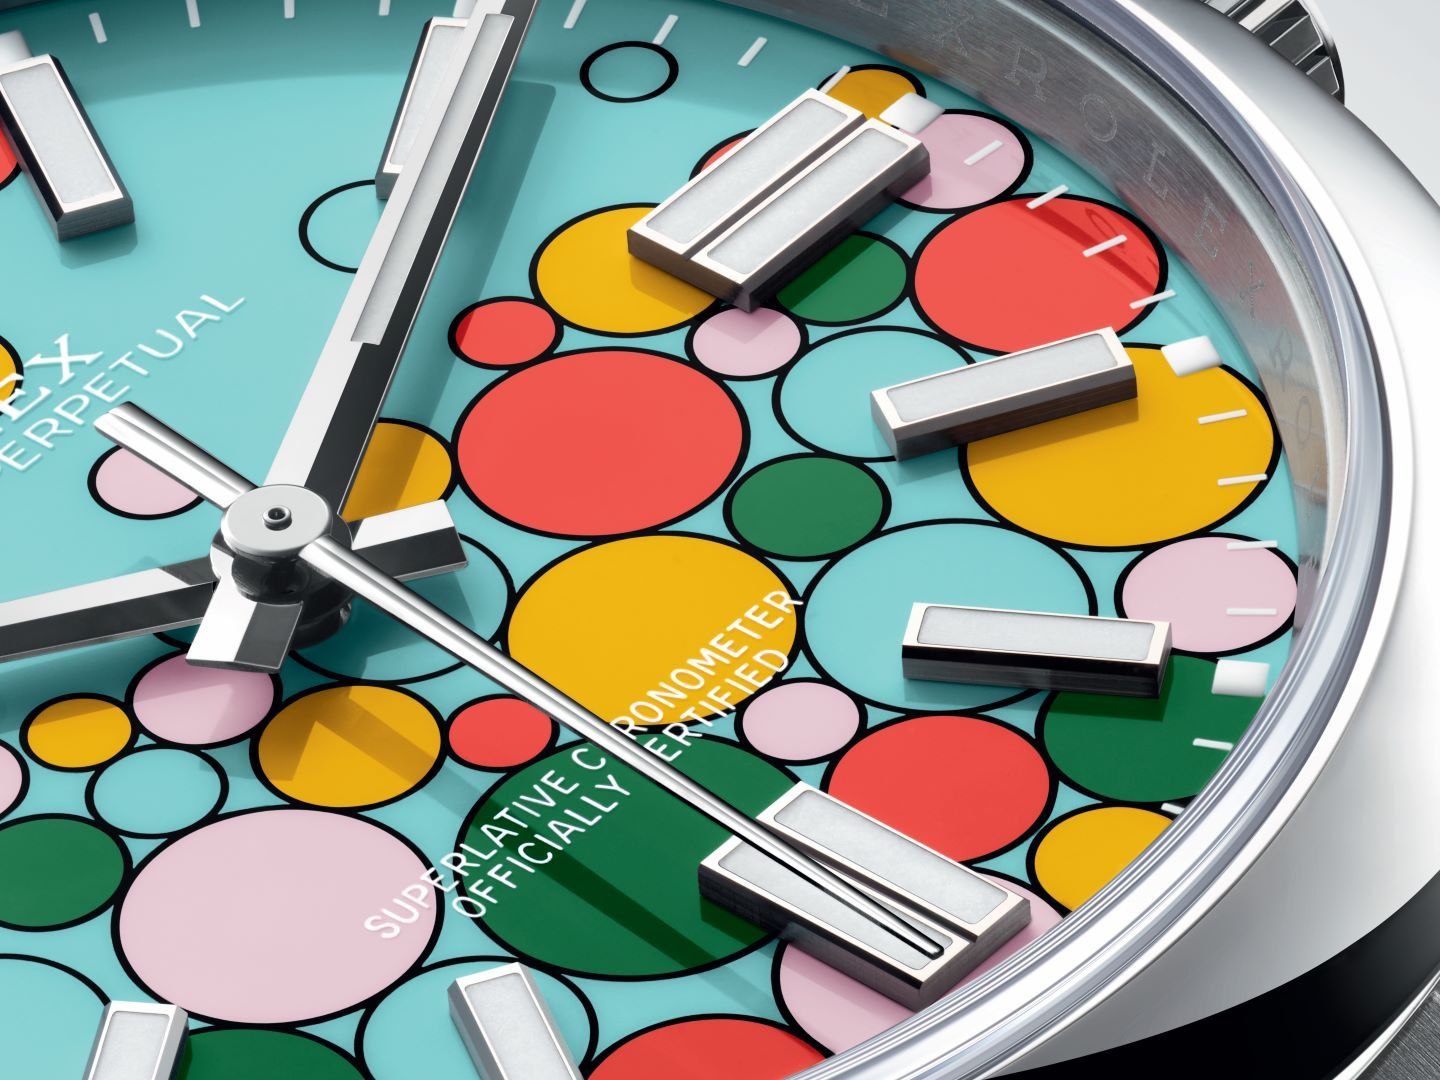 The lacquered turquoise dial of the Oyster Perpetual Celebration features an effervescent design of 51 bubbles in 5 colors